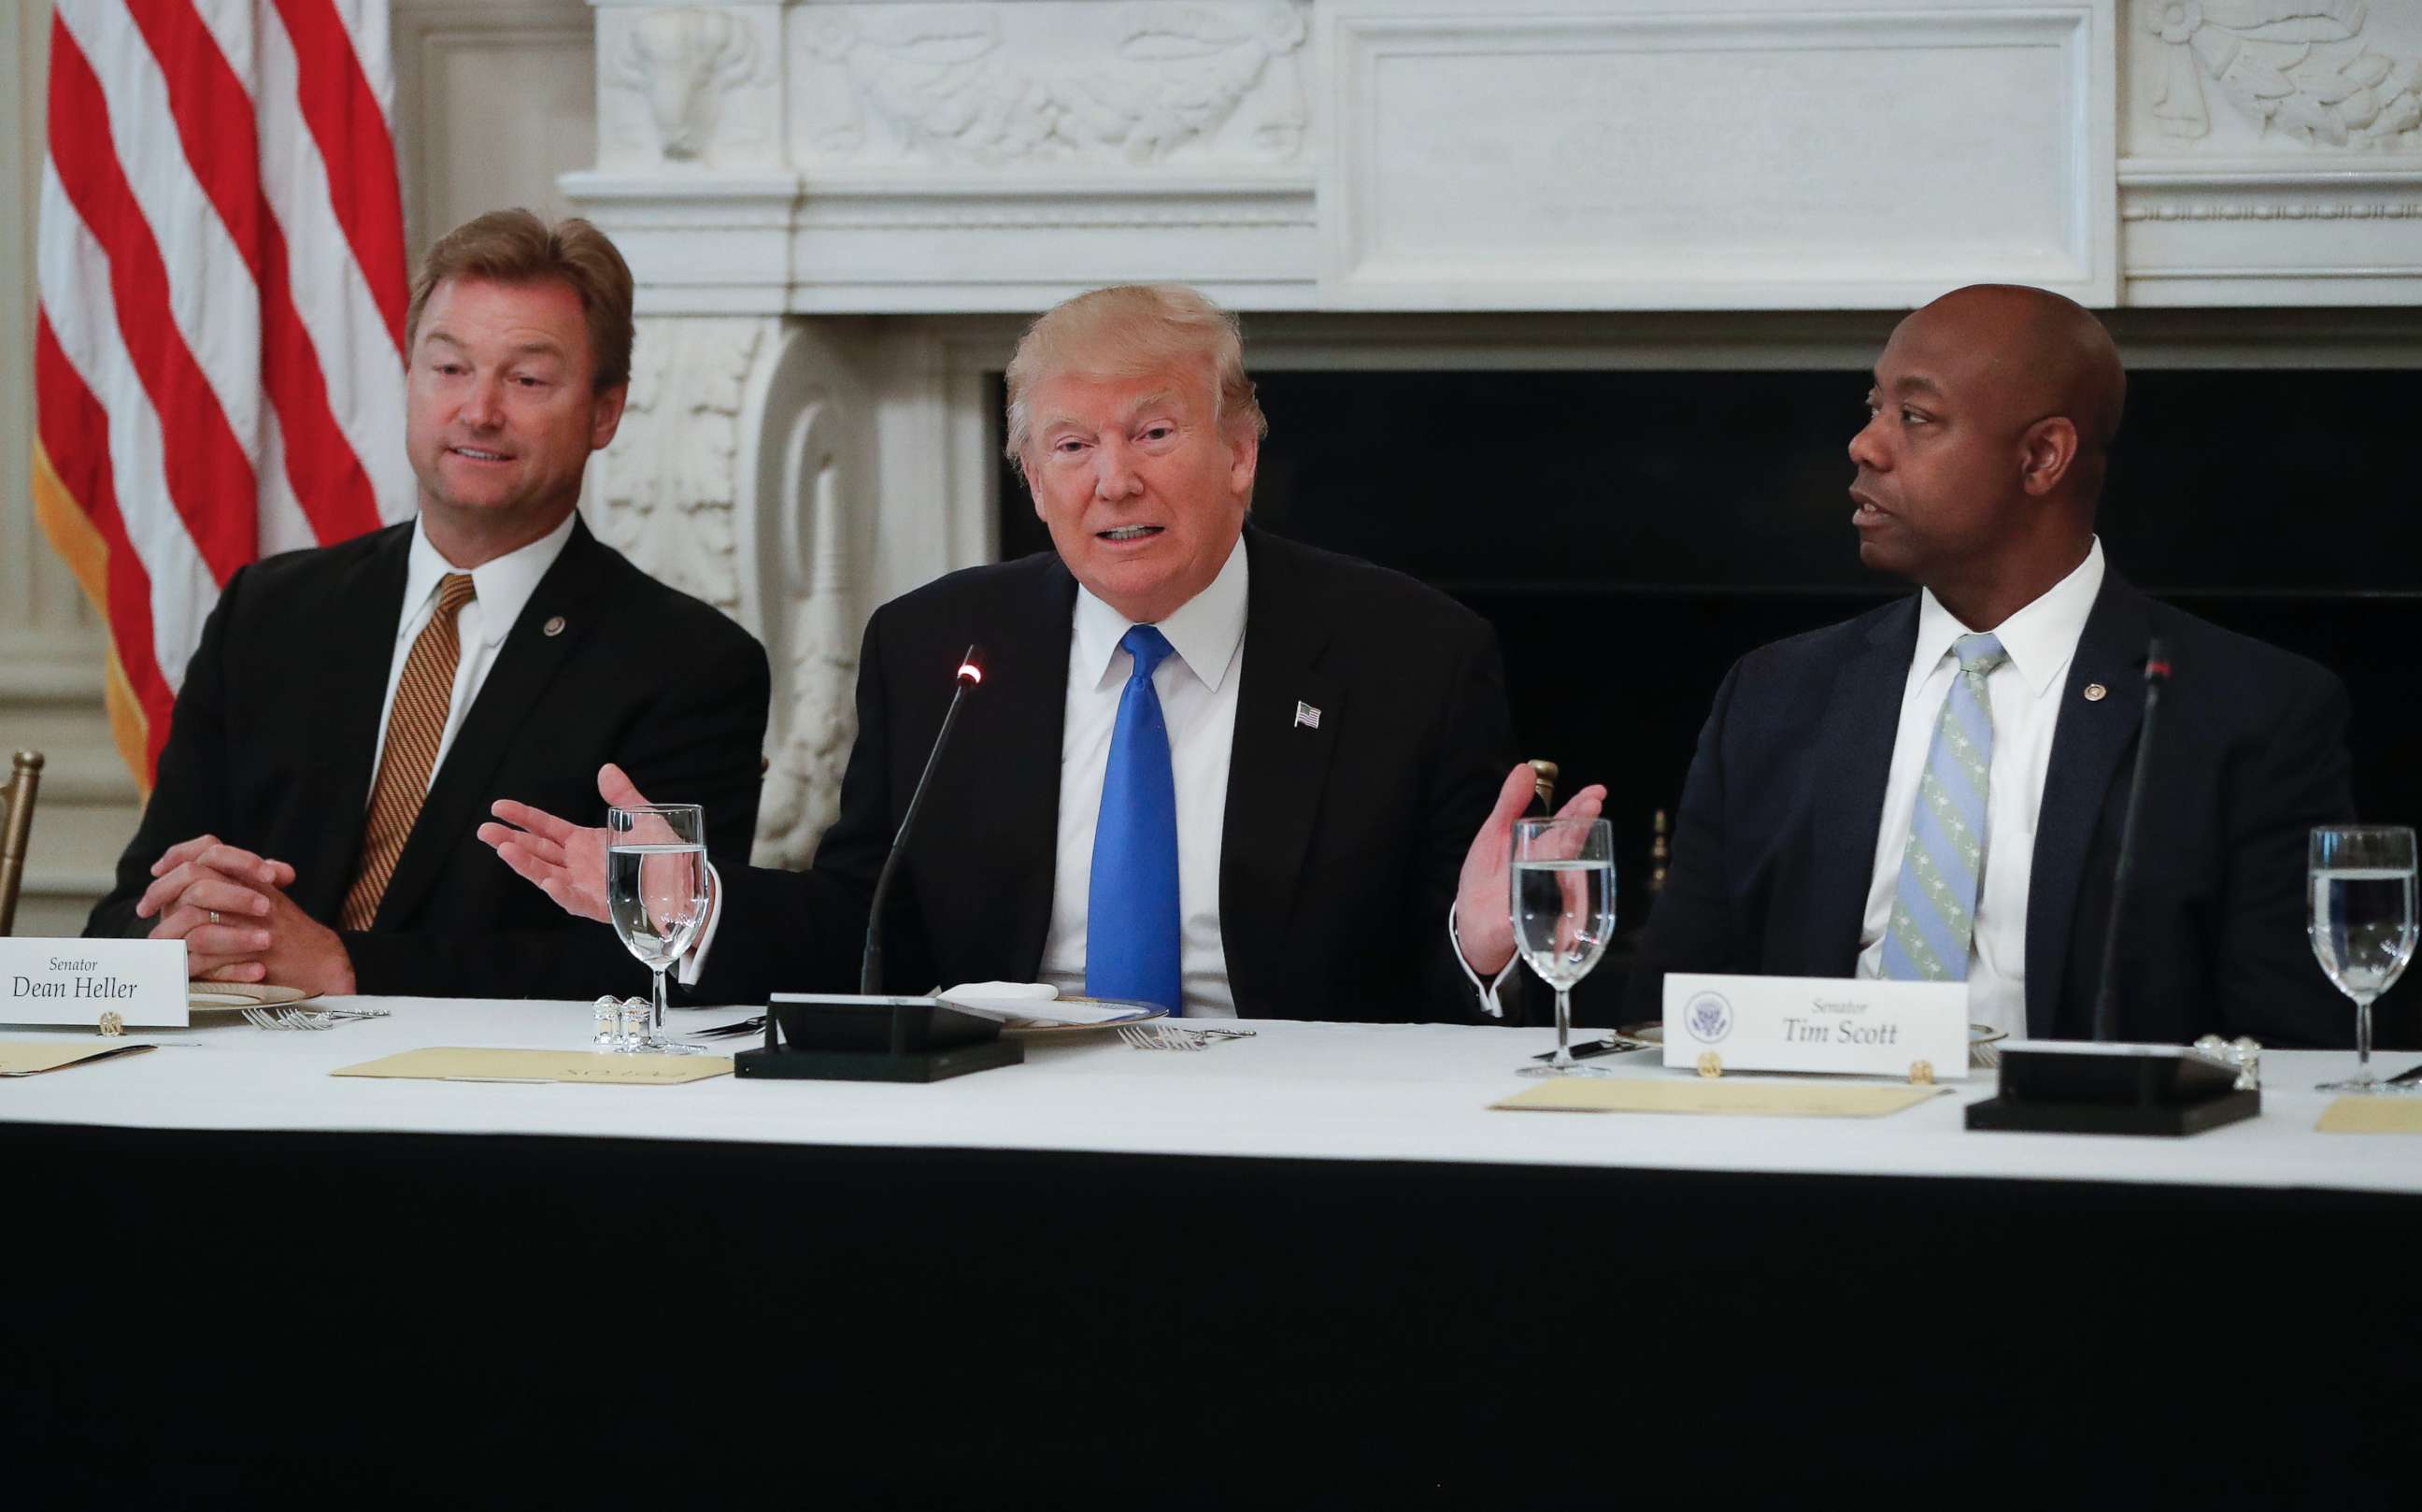 PHOTO: President Donald Trump, flanked by Sen. Dean Heller, R-Nev., left, and Sen. Tim Scott, R-S.C.,speaks at a luncheon with GOP leadership, July 19, 2017, in the State Dining Room of the White House in Washington. 